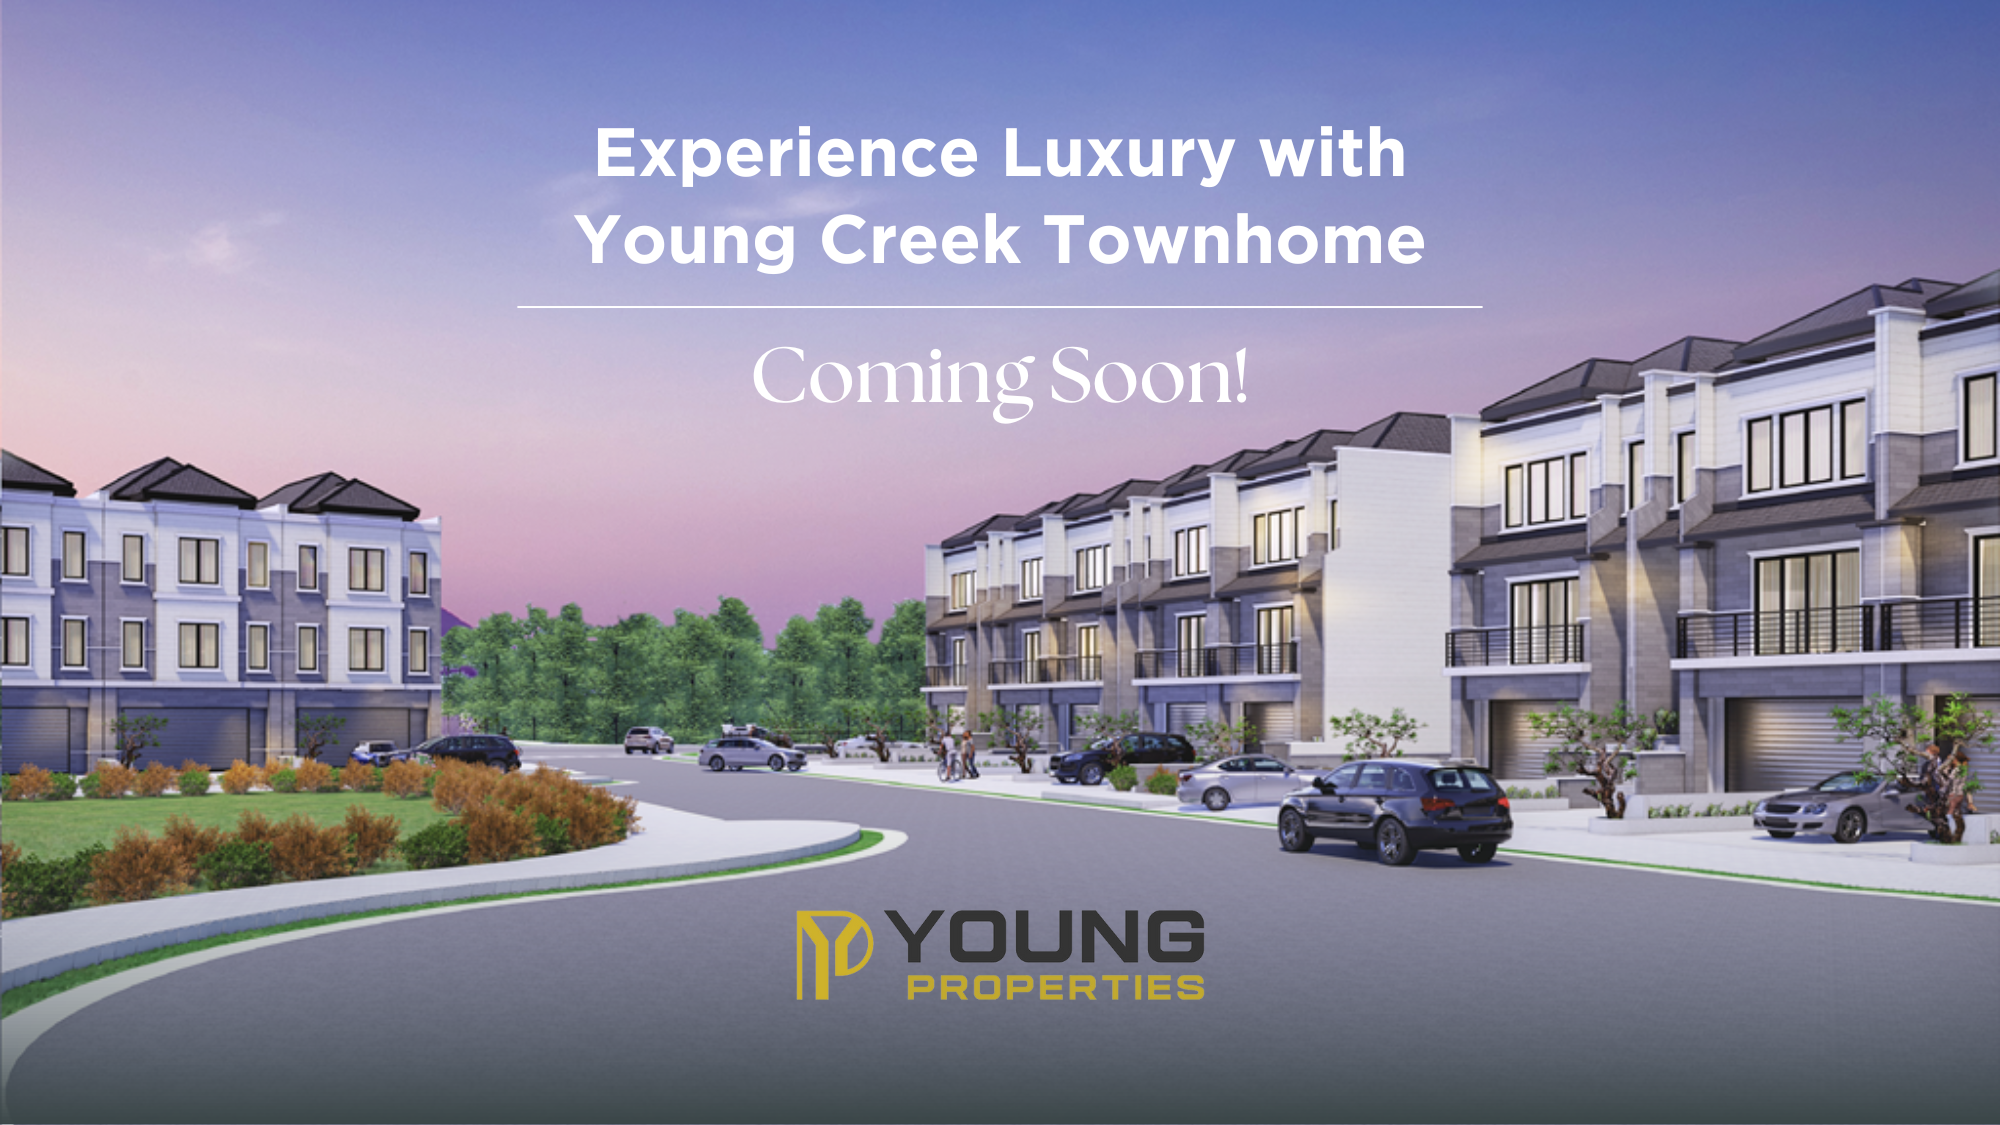 Experience Luxury with Young Creek Townhome by Young Properties. Coming Soon!